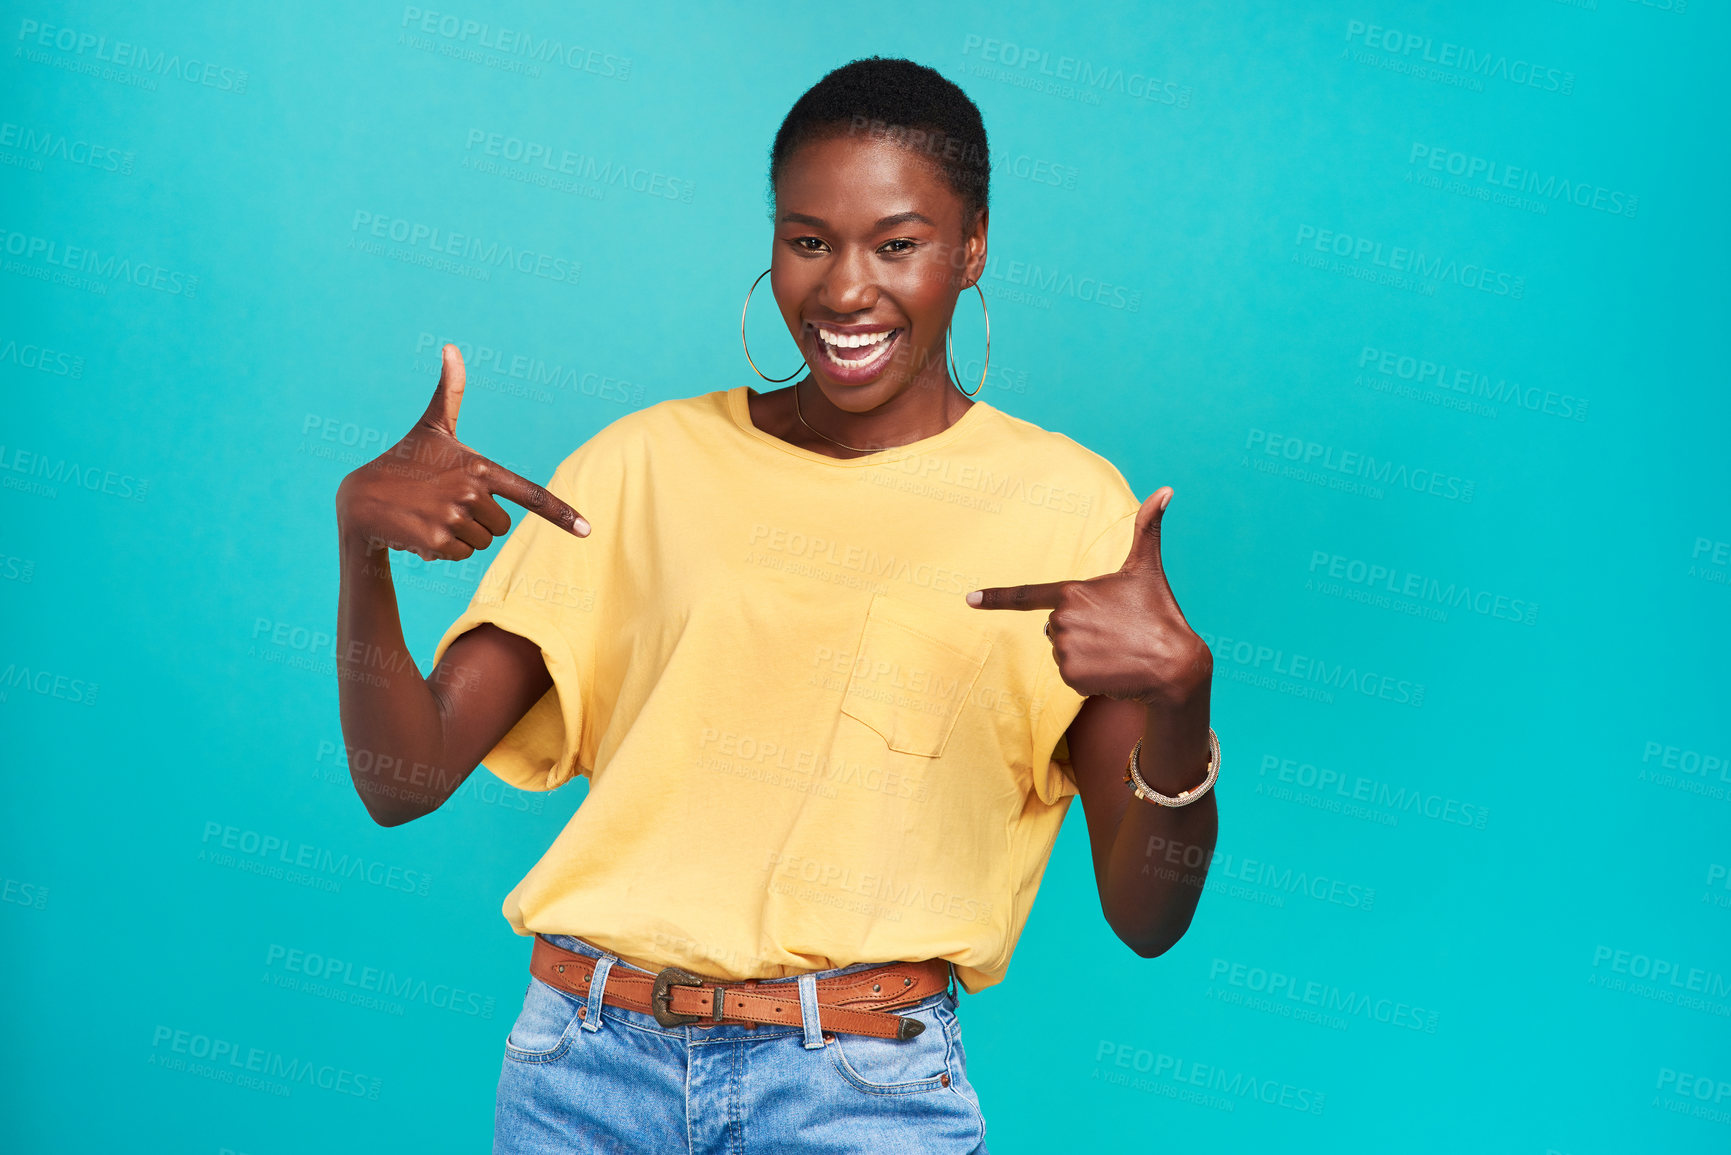 Buy stock photo Portrait, crazy and pointing with a black woman in studio on a blue background looking carefree or silly. Smile, fashion and fun with a happy young female hipster feeling confident or playful